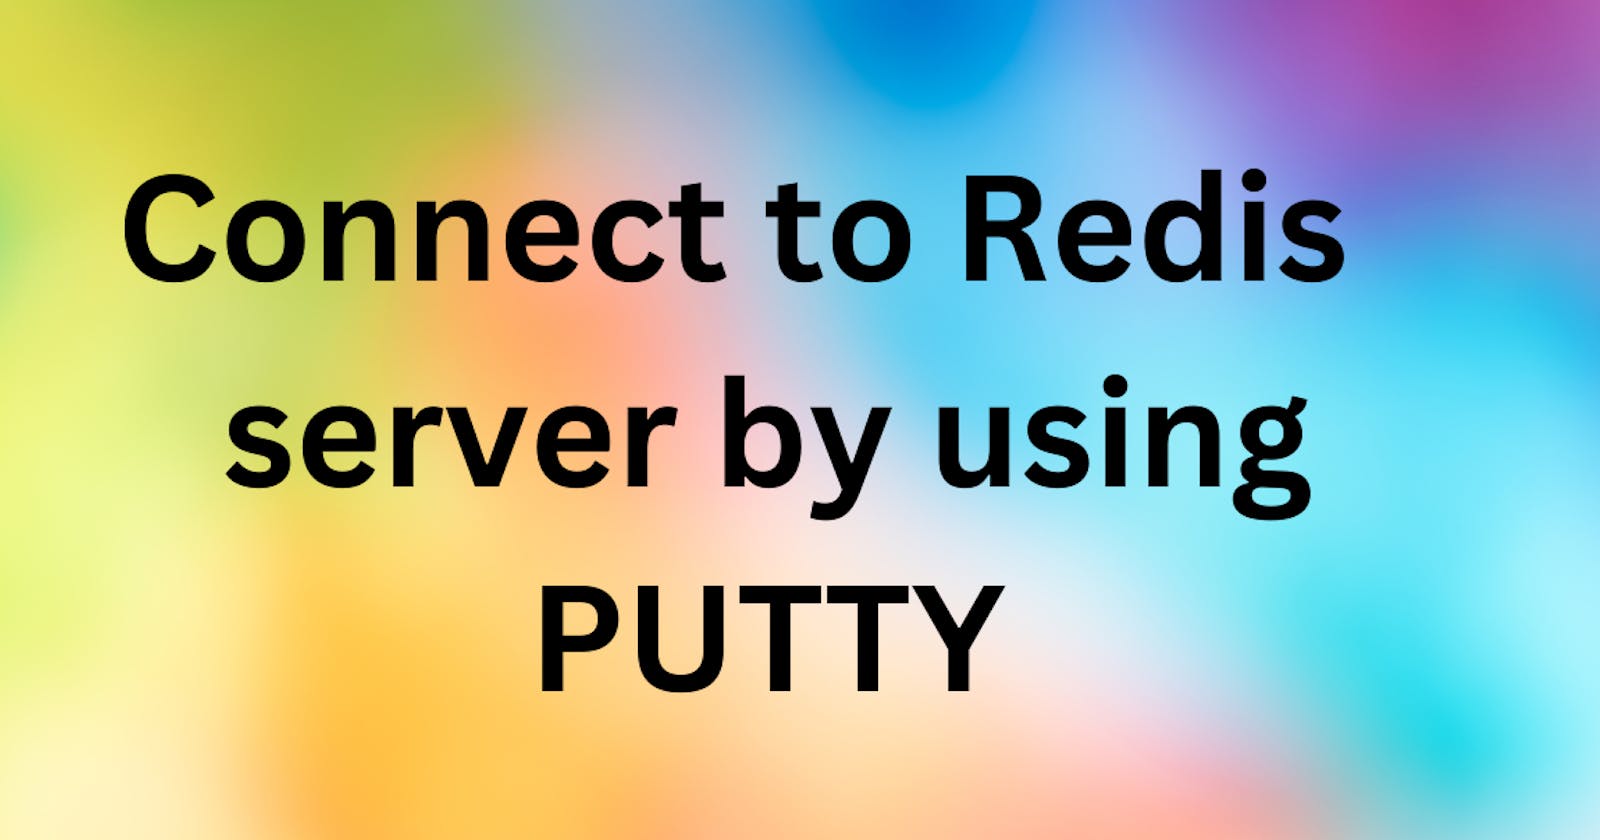 How do I connect to a Redis server using PuTTY?